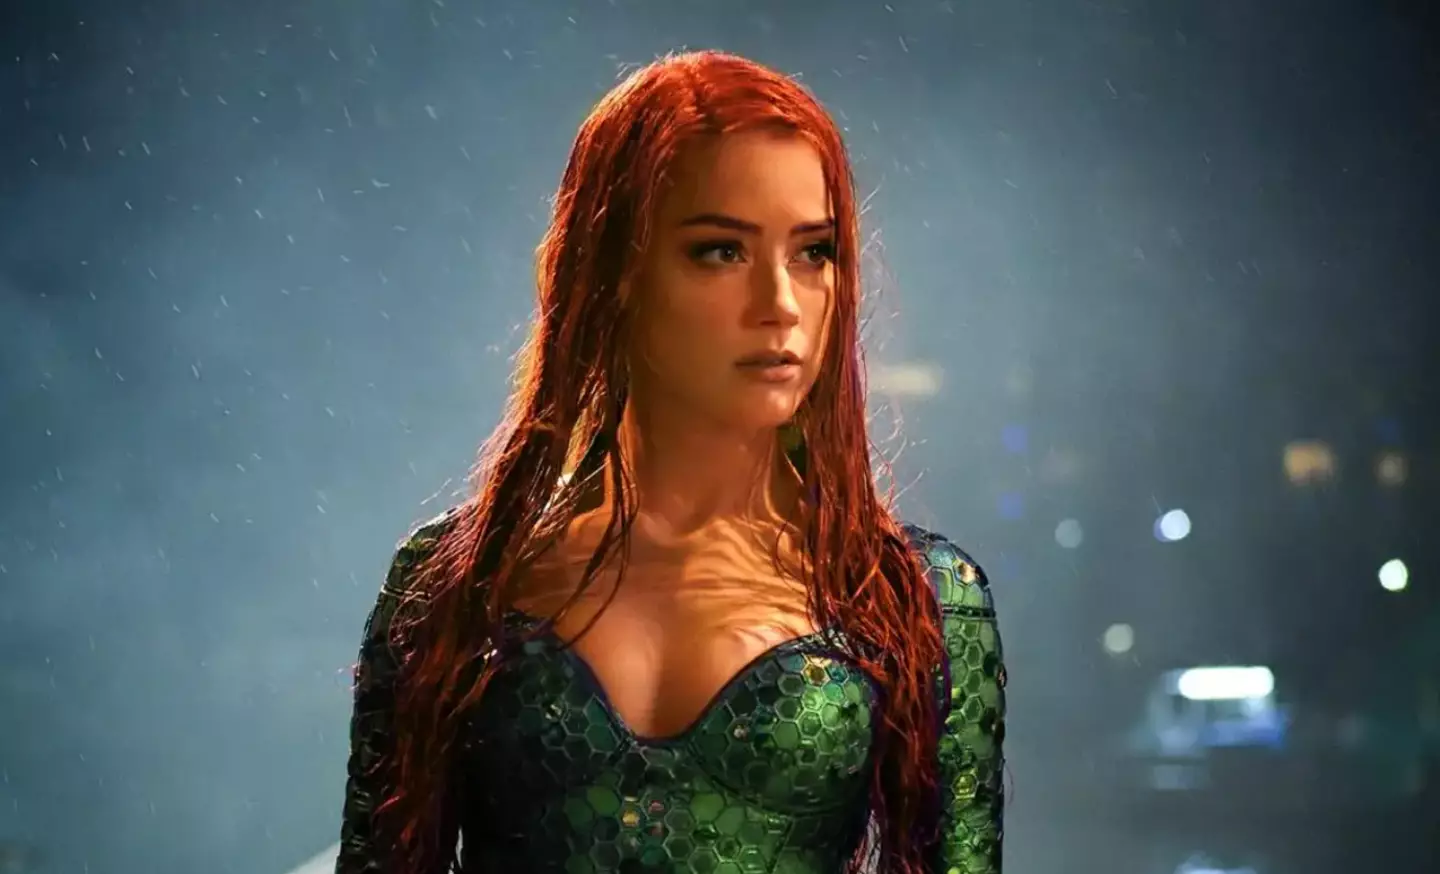 Heard’s agent revealed she was almost recast for Aquaman 2.